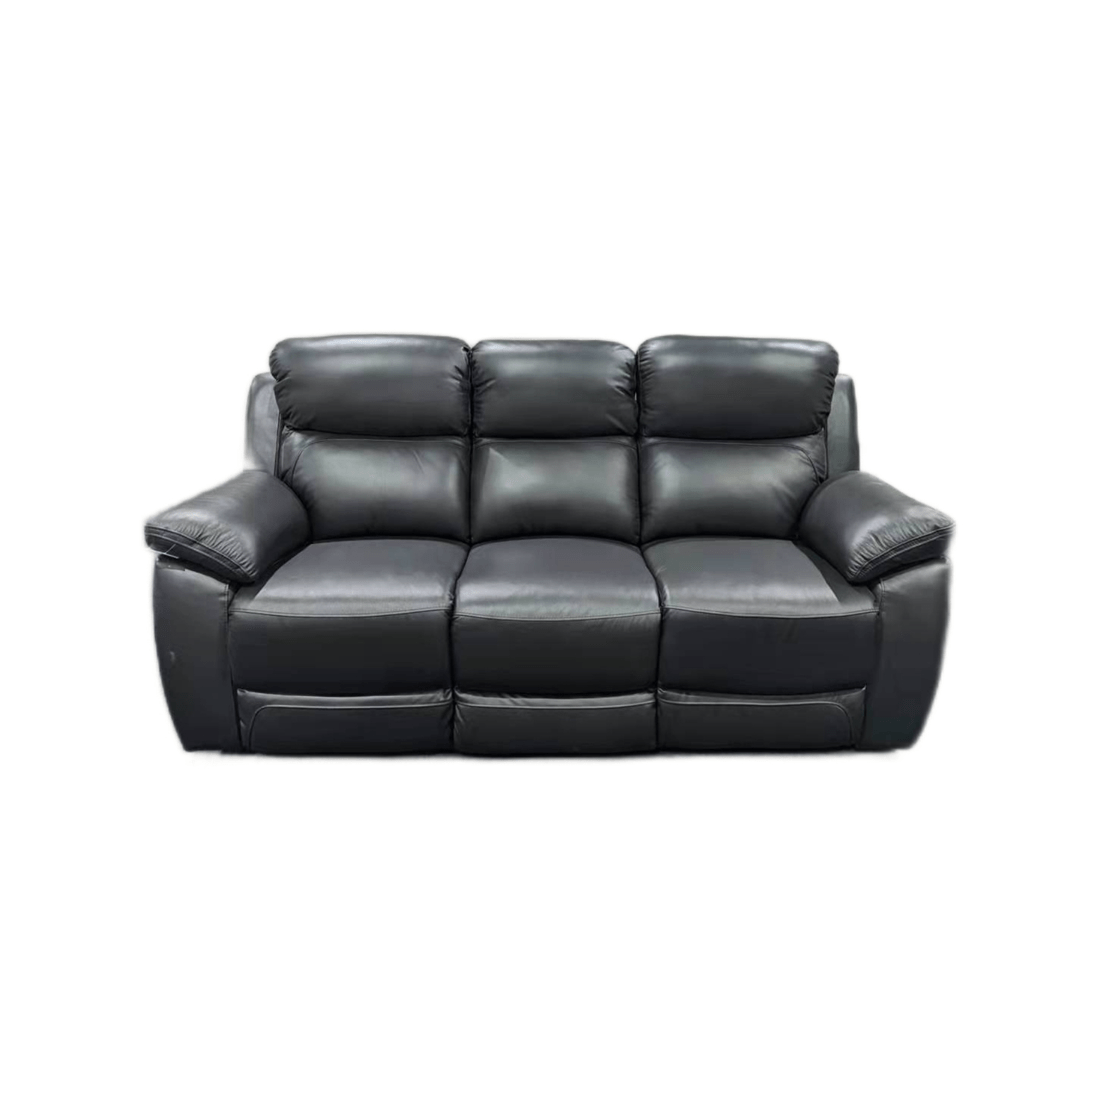 Federico Manual Leather Recliner Suite